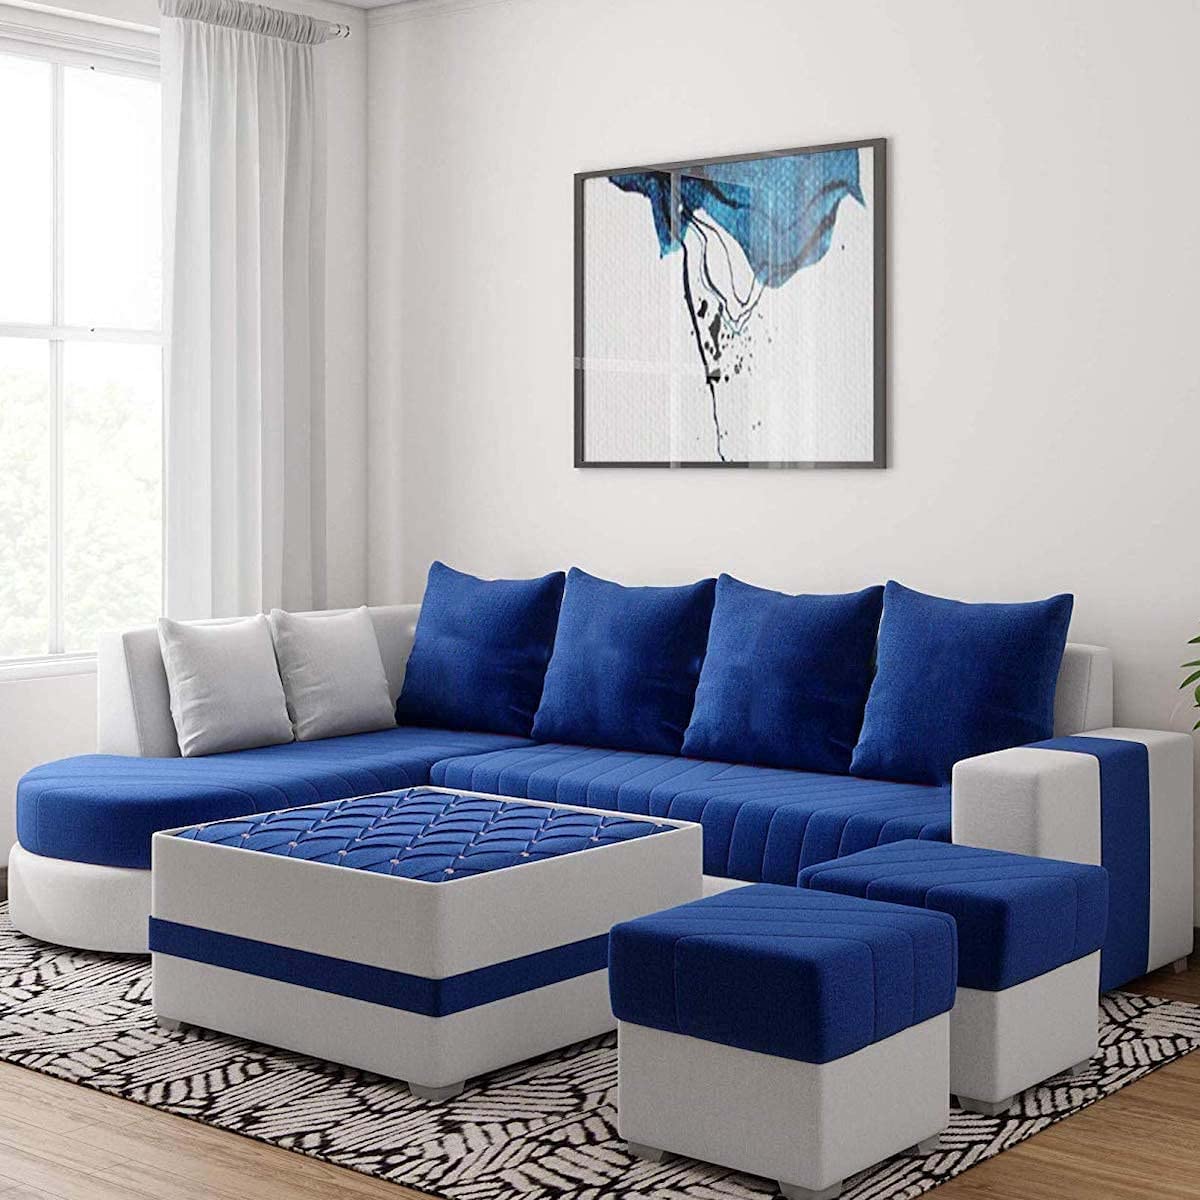 Torque India Christie L Shape 8 Seater Sofa Set with Centre Table and 2 Puffy | L Shape 8 Seater Sofa Set - Torque India